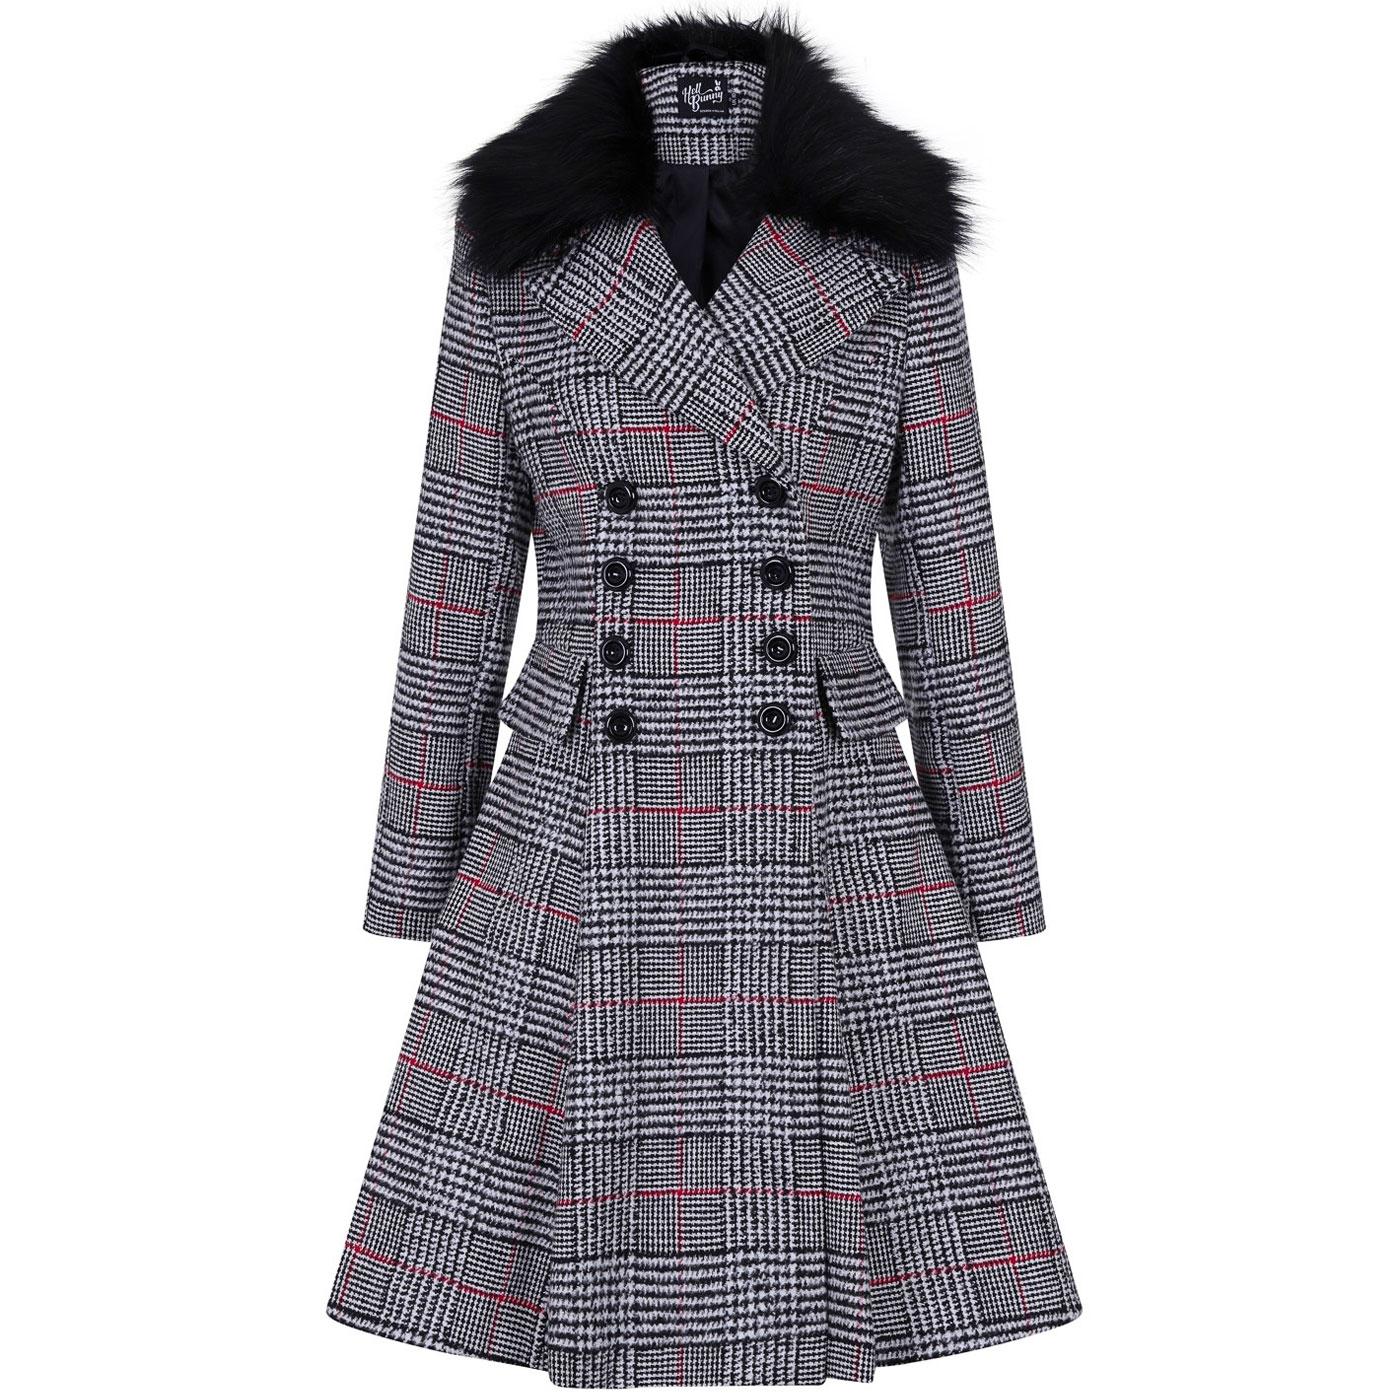 Pascale HELL BUNNY Vintage Check Winter Coat